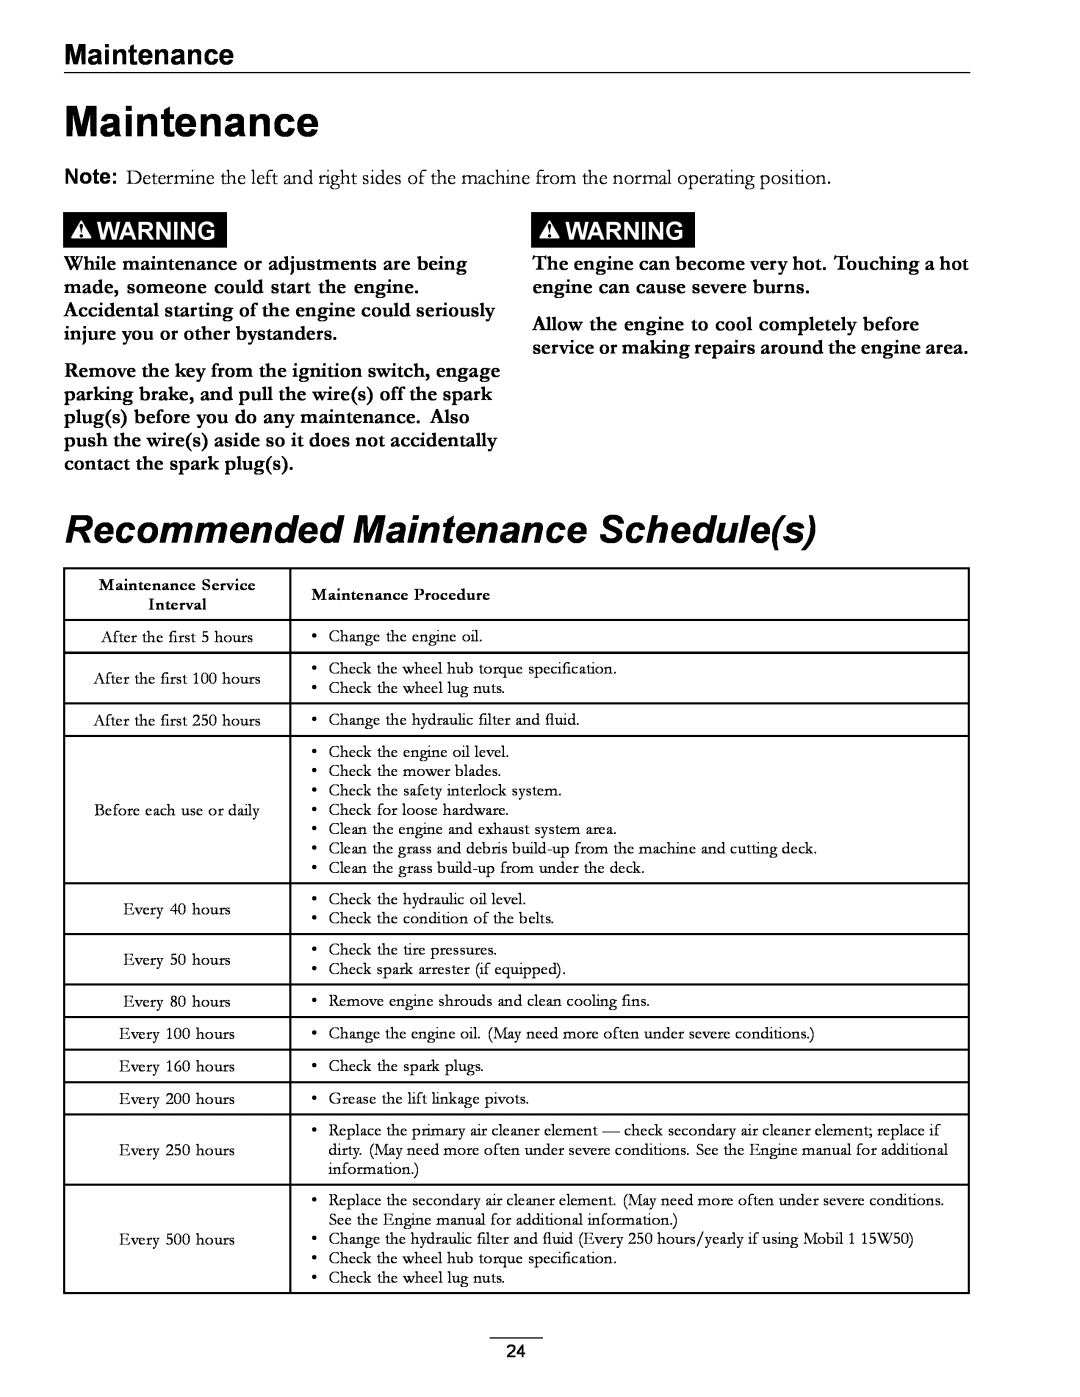 Exmark 000 & higher, 920 manual Recommended Maintenance Schedules 